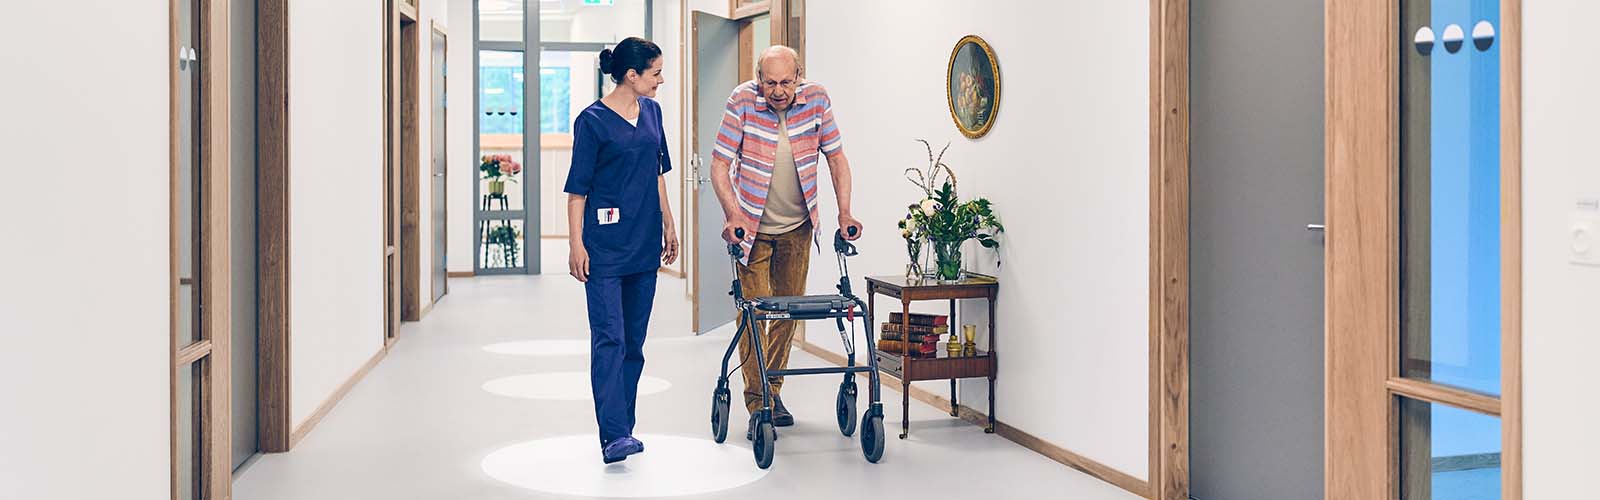 A female professional caregiver and an elderly male resident with mobility aid walking down a hallway in a nursing home environment